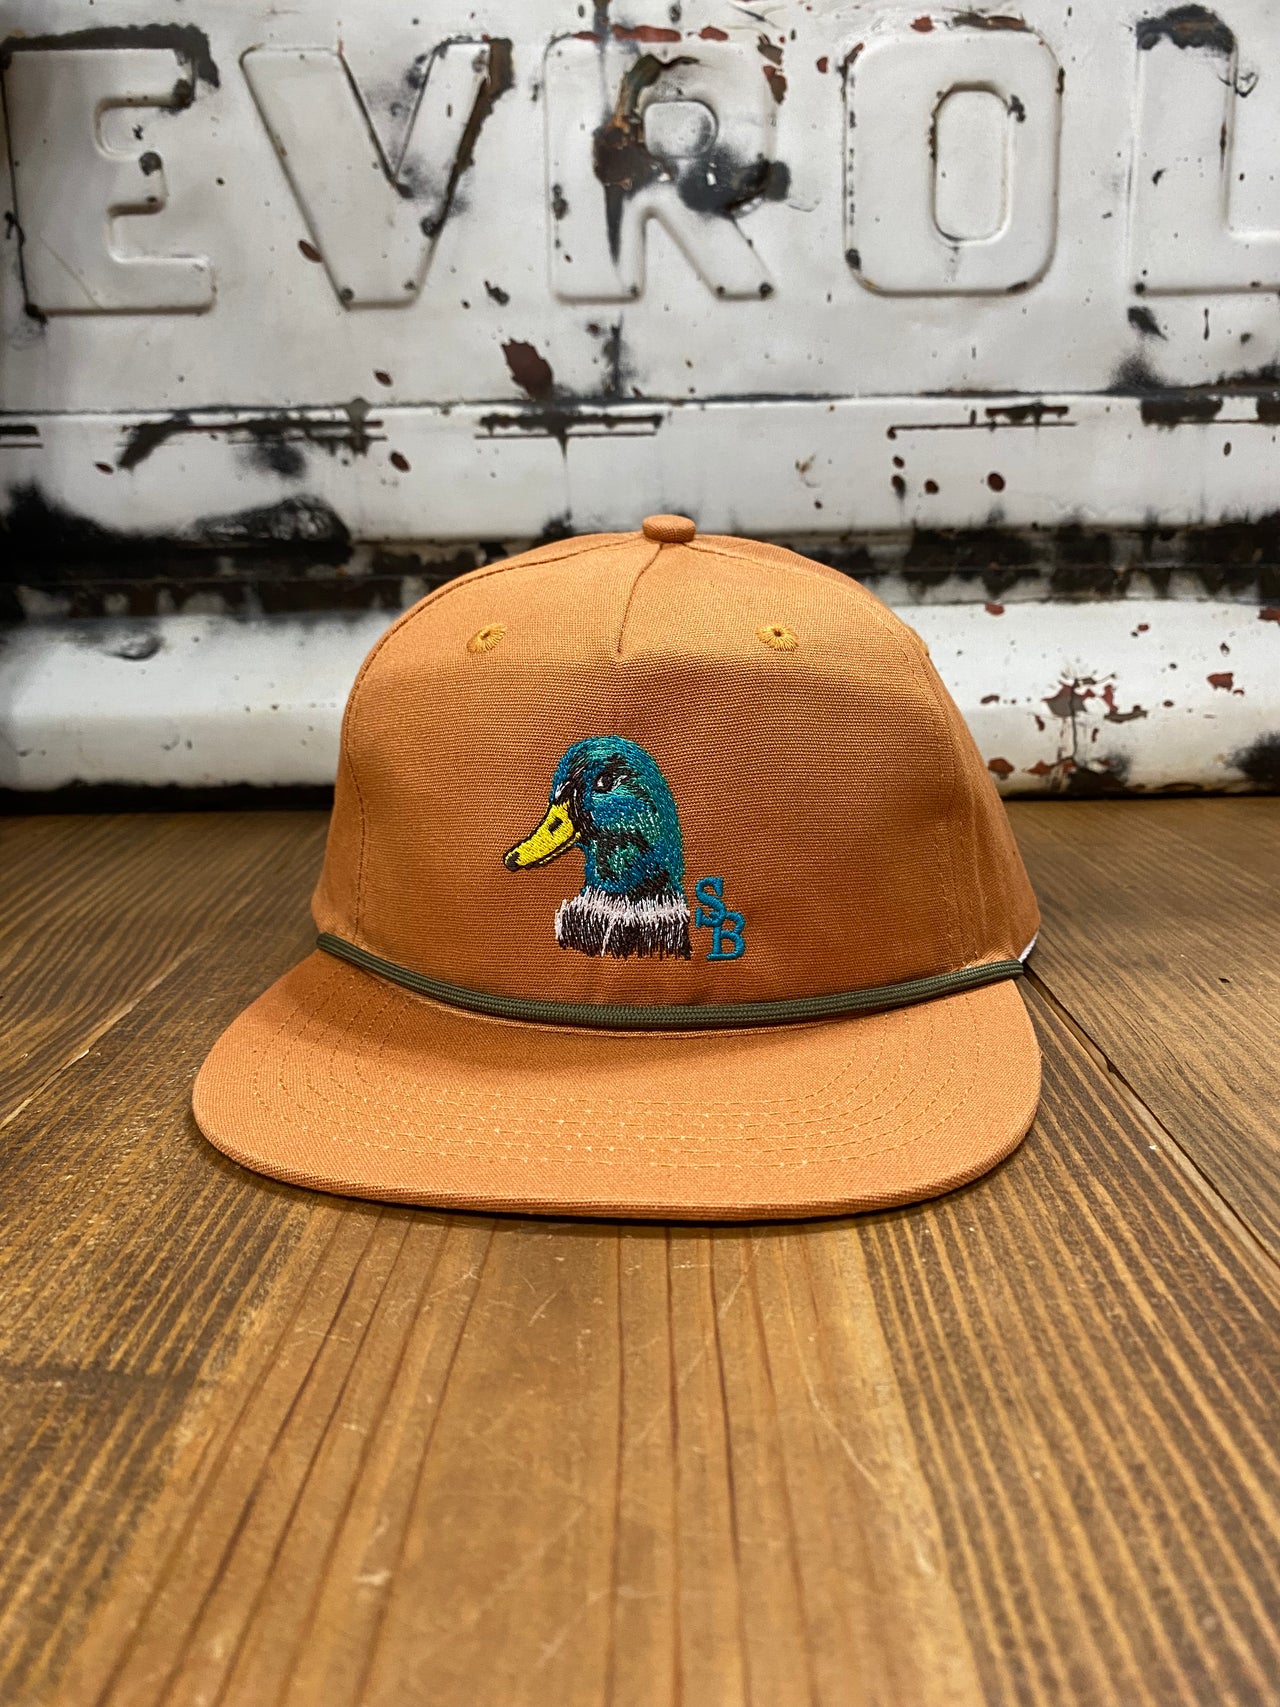 Terracotta-colored cap featuring a duck head emblem on the front, made from 100% cotton with a 550 paracord for durability. The mid-crown design, adjustable snapback, and one-size-fits-most feature make it a versatile and stylish accessory for various occasions.